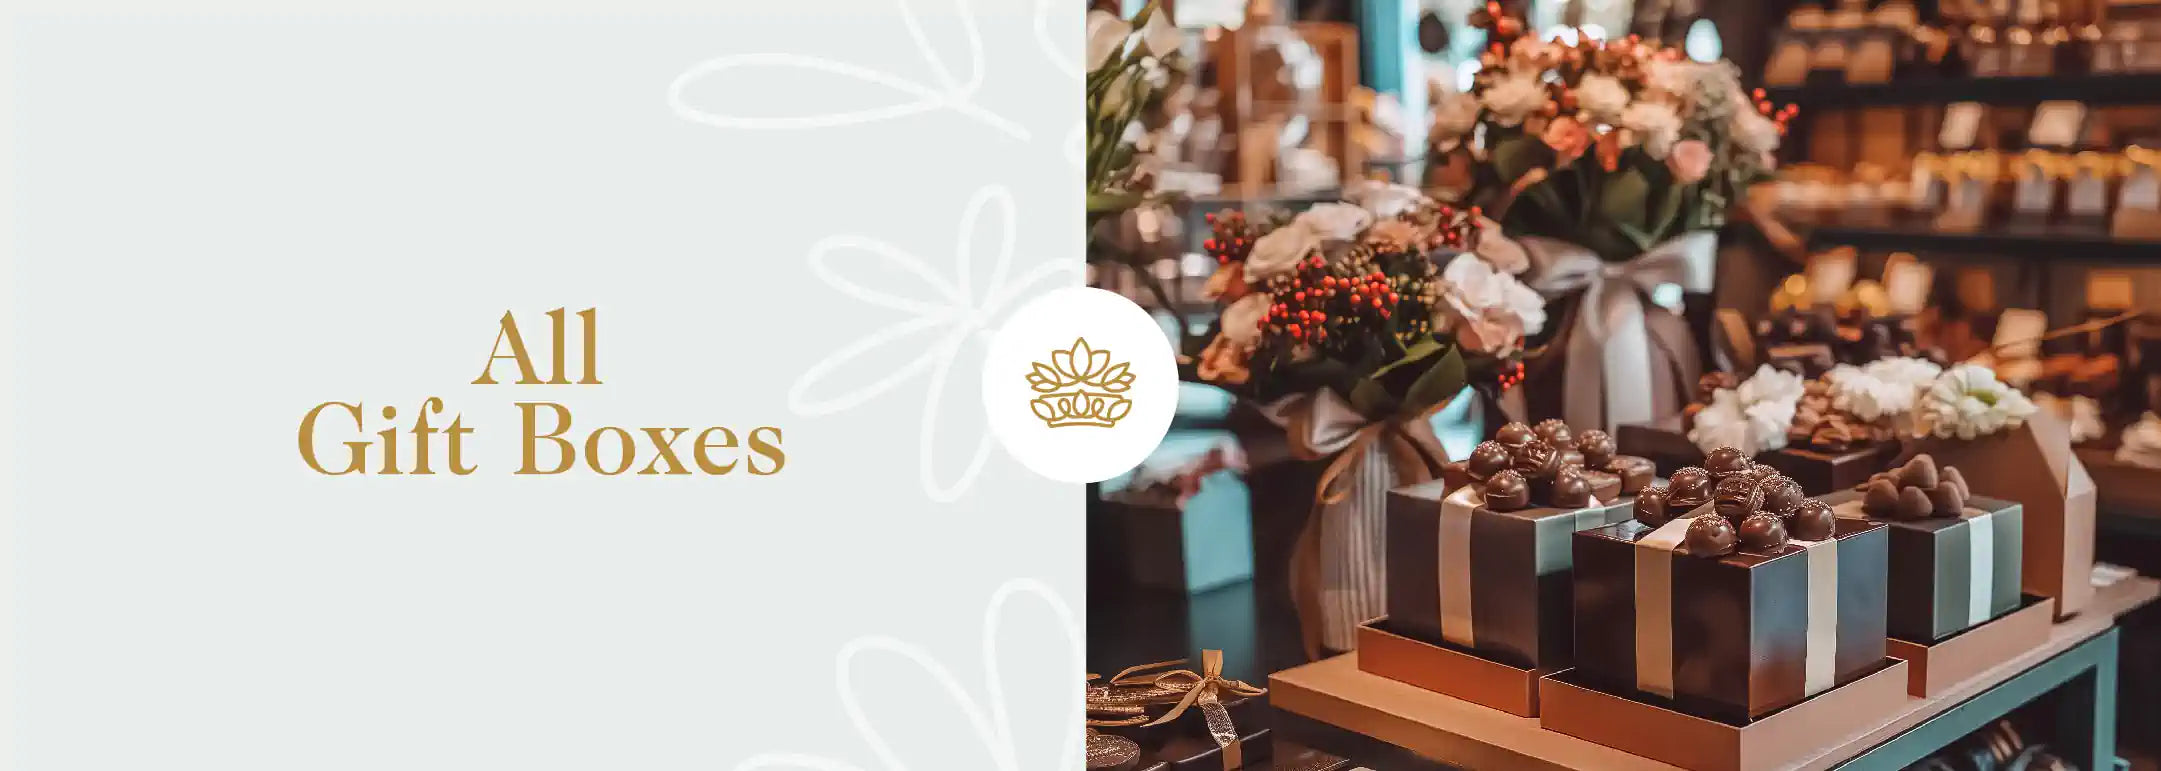 An exquisite selection of gift boxes featuring gourmet chocolates and elegant floral arrangements on display, ideal for any special occasion at Fabulous Flowers and Gifts.